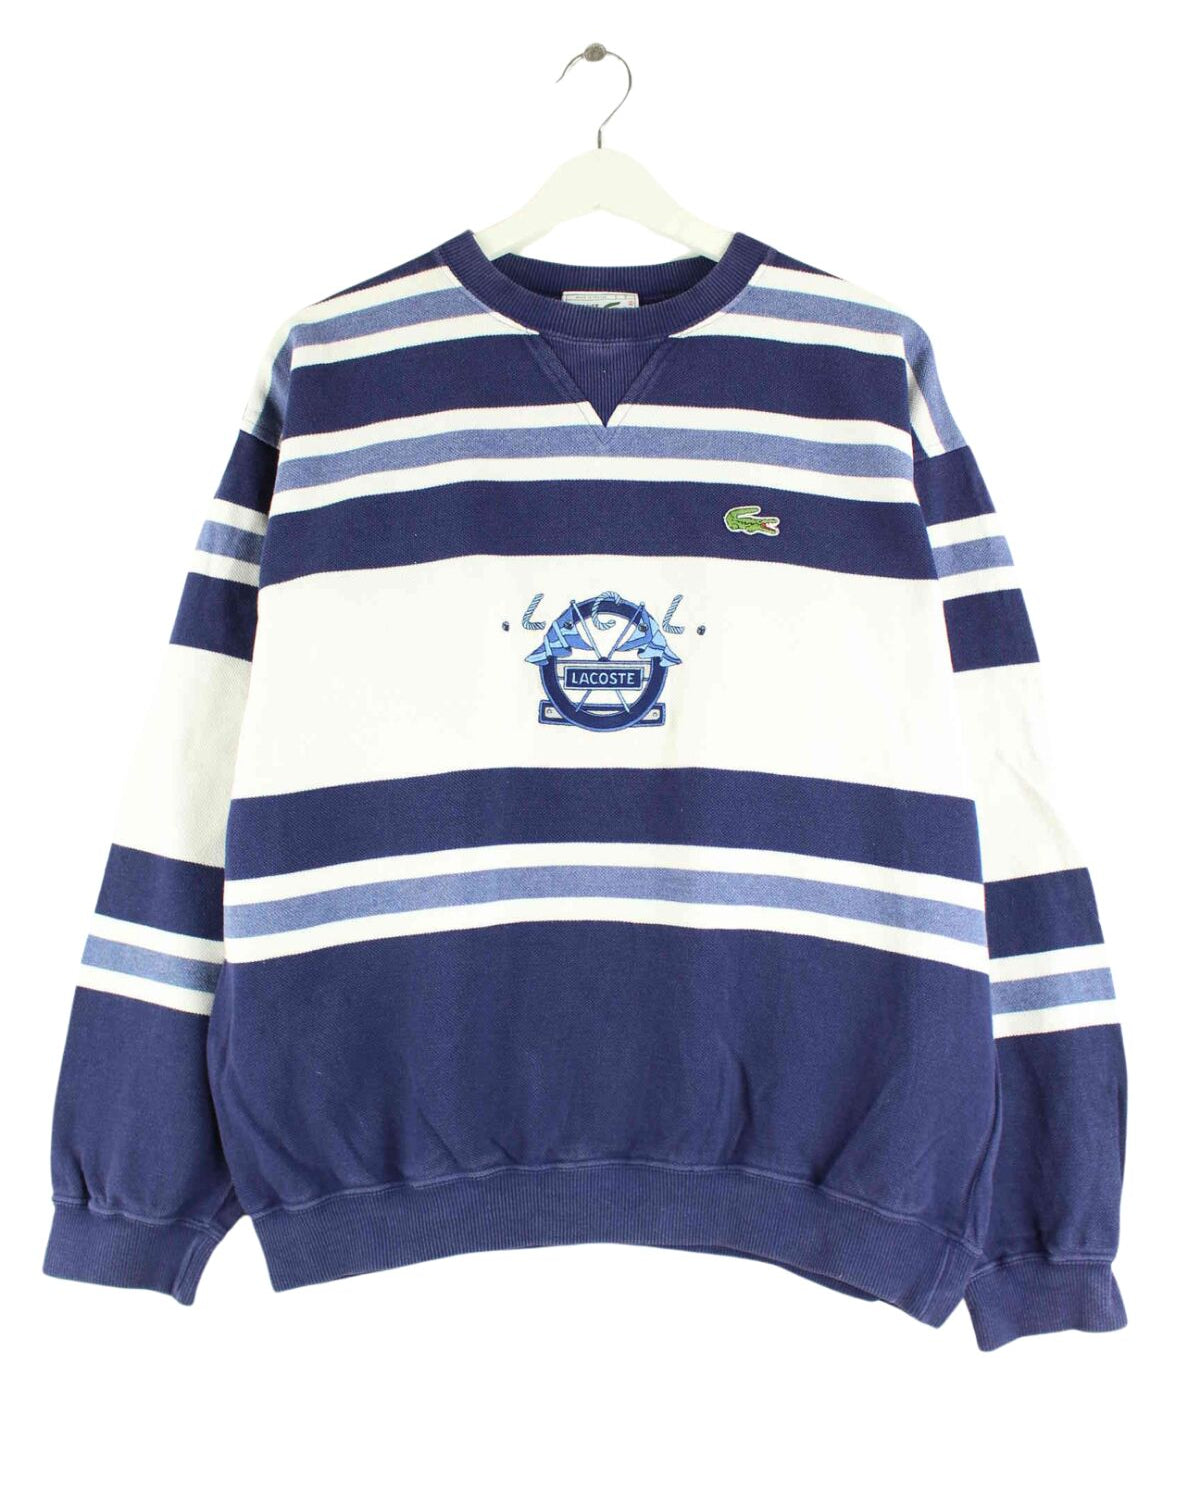 Lacoste 90s Vintage Sail Embroidered Sweater Blau S (front image)